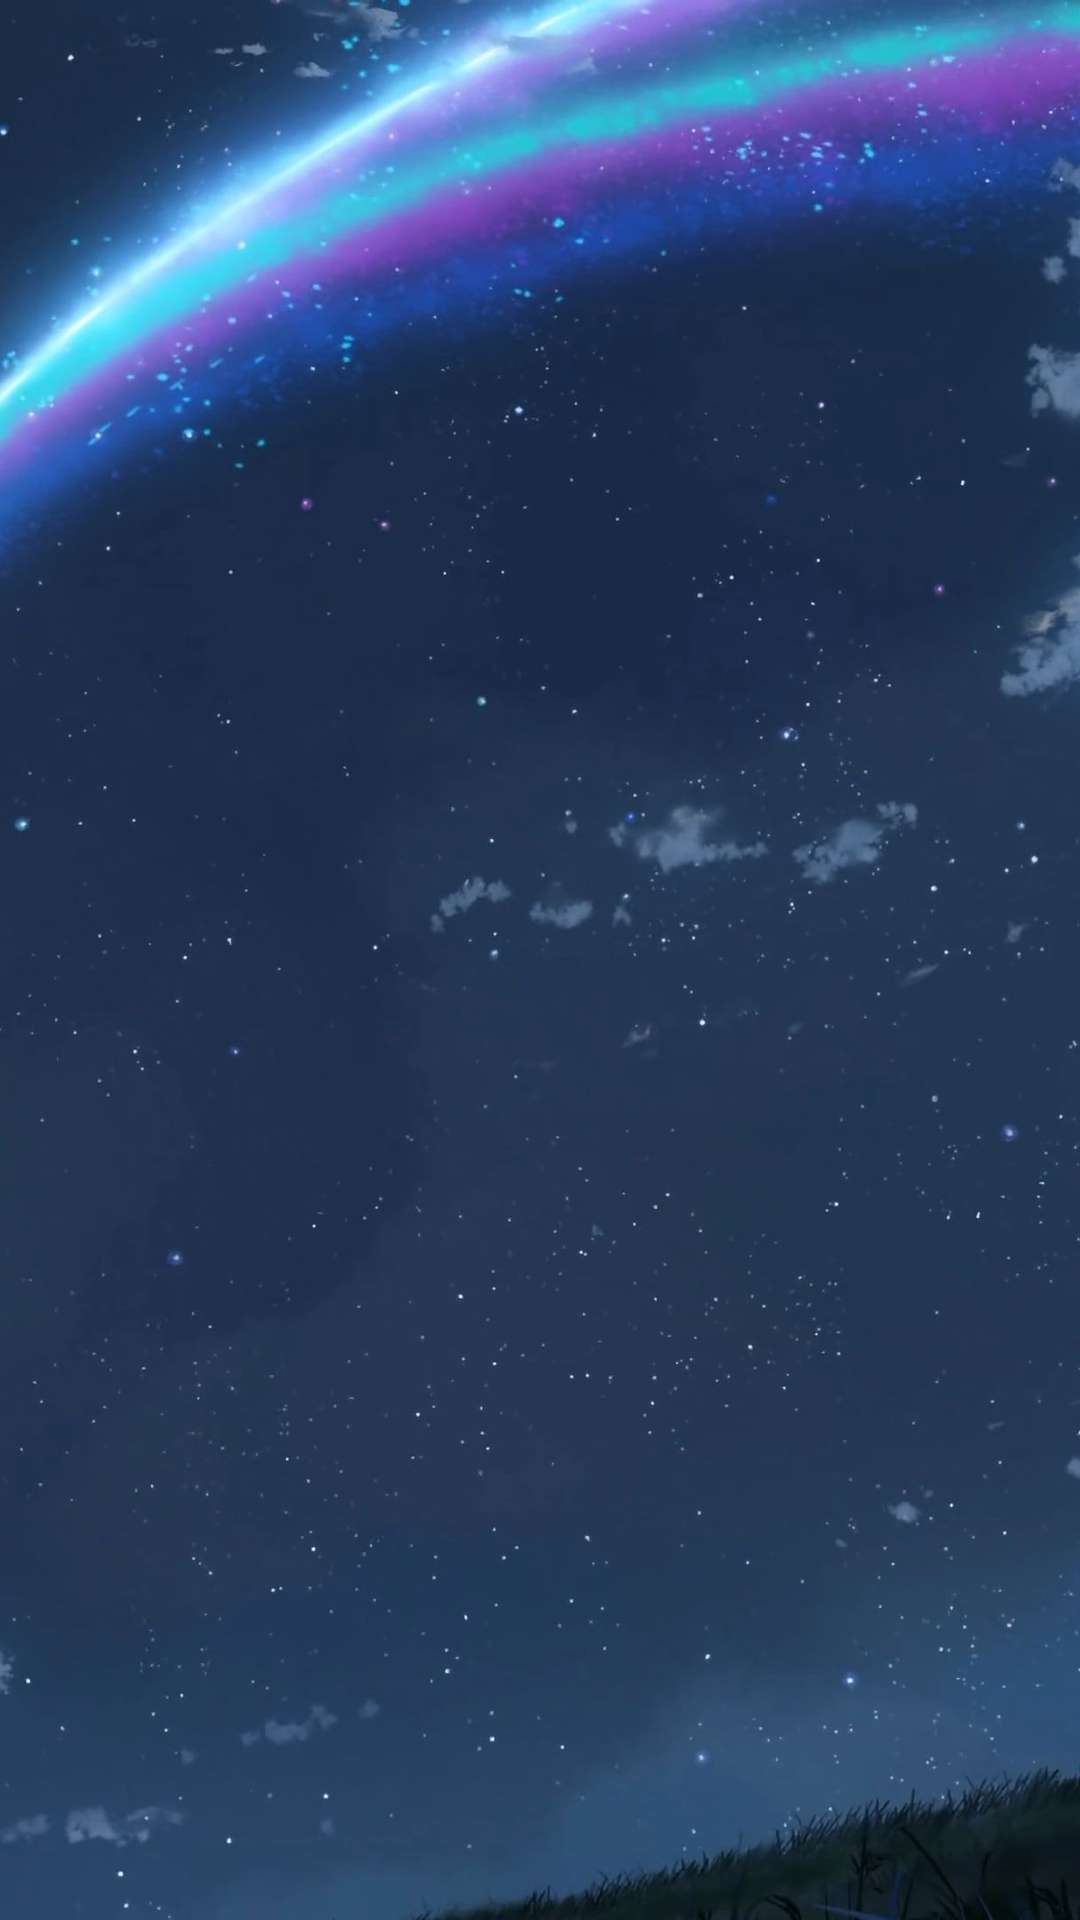 Your Name Wallpaper for iPhone and Android